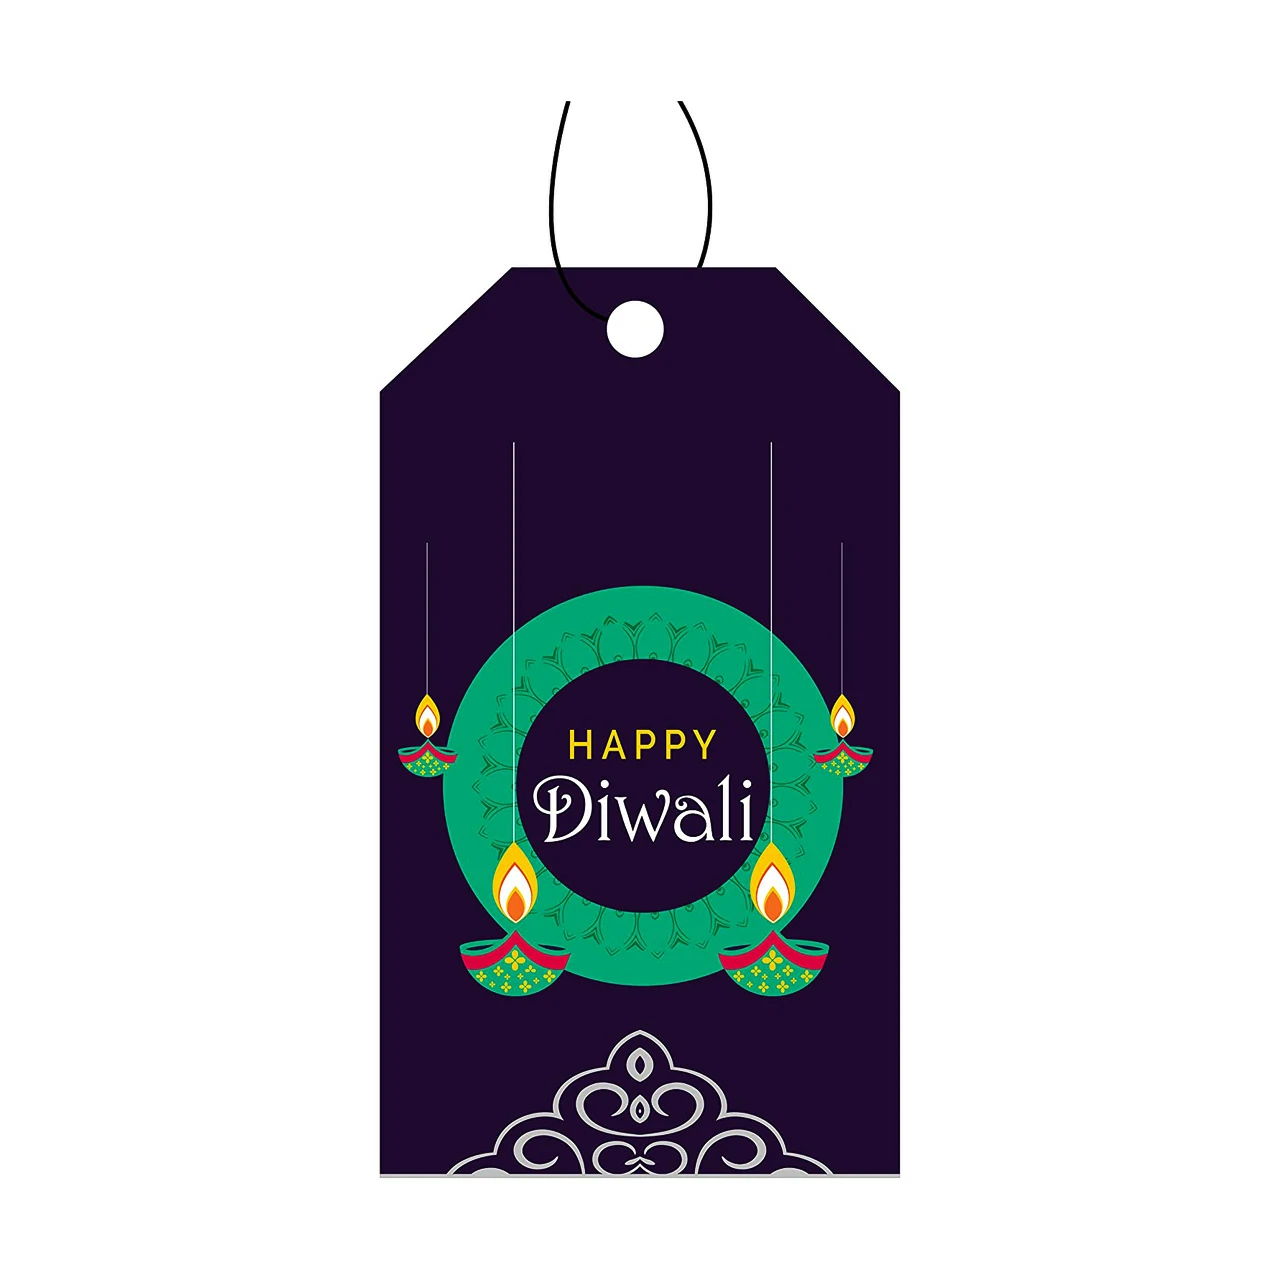 DIWALI MULTICOLORED GIFT TAGS FOR GIFT PACKAGING | DIWALI GIFTS | DIWALI GIFT TAGS | DIWALI GIFTS FOR FRIENDS| DIWALI GIFTS FOR FRIENDS AND FAMILY |GIFTS FOR DIWALI (Design 3)